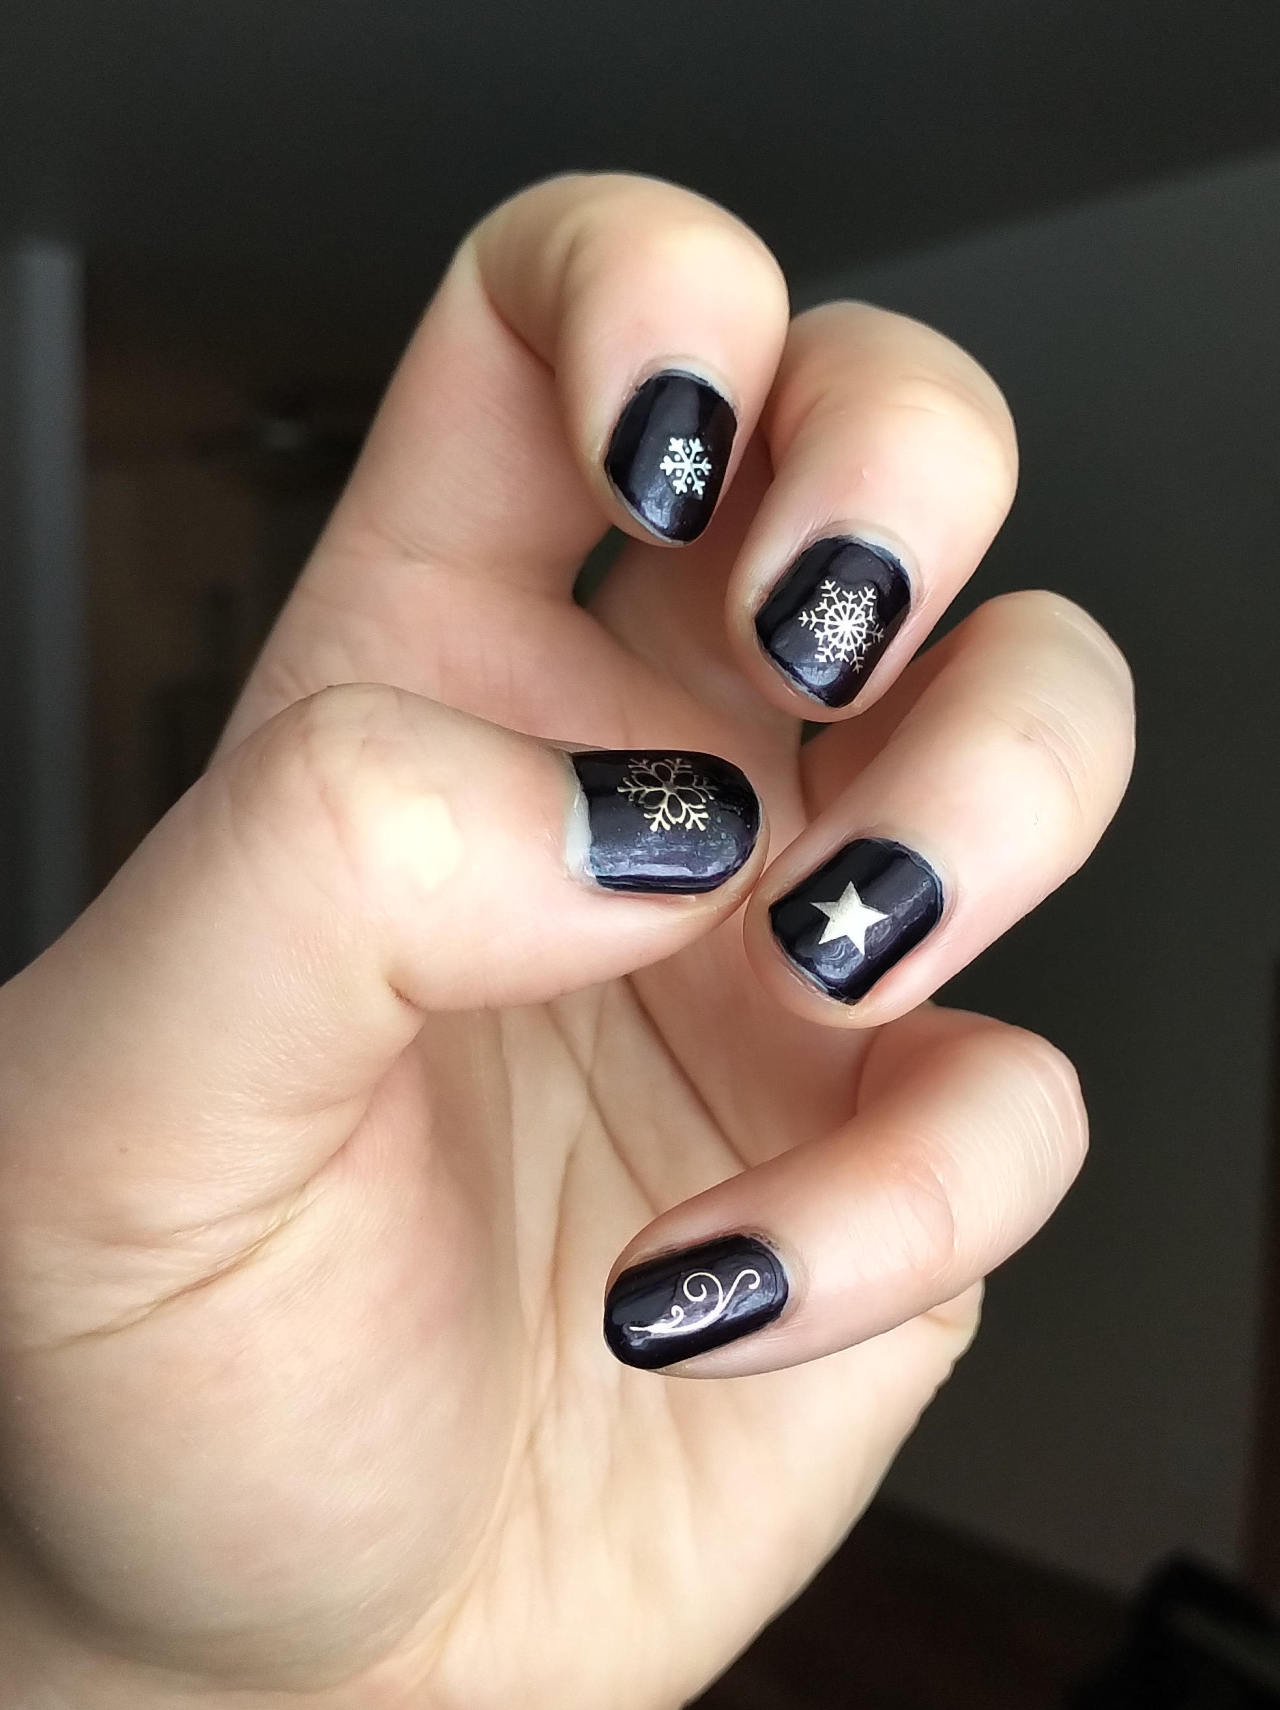 Continuing the festive goth nails, this was my new years look (photo taken after a several days of wear).  Sally Hansen Complete Salon Manicure in 641 Belle of the Ball is a deep blue-purple with subtle reddish shimmer.  In the bottle it looks to be a shimmery deep bordeaux red, but on the nail it comes out dark dark purple.   #nails #goth new year  #goth new year nails #snowflakes#nailstickers#sally hansen #Belle of the Ball  #Sally Hansen Belle of the Ball #festivegoth #festive goth nails